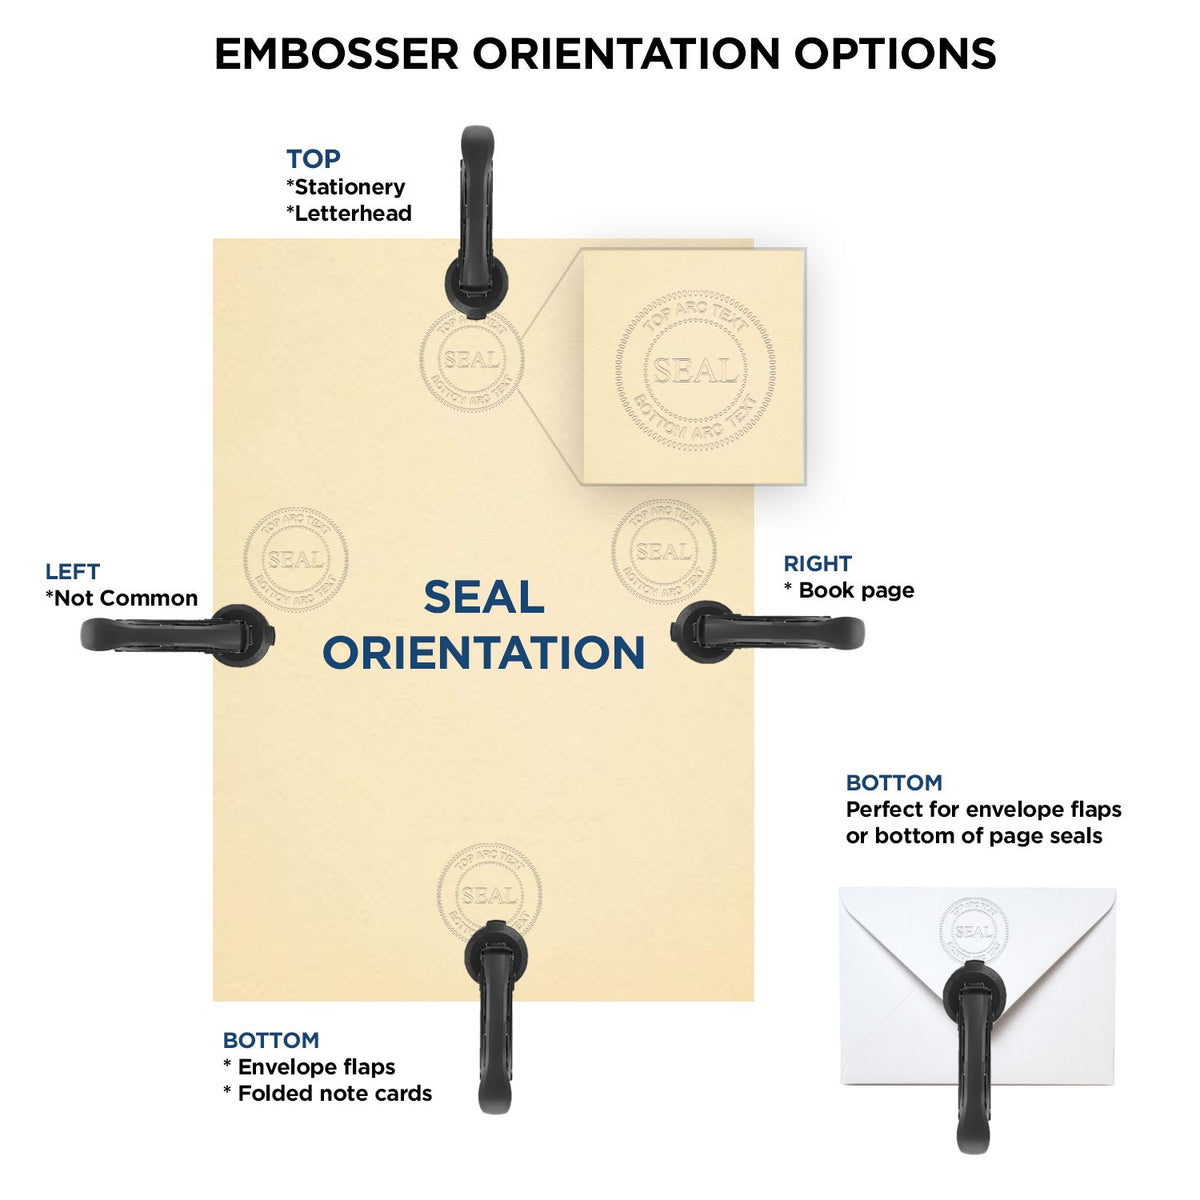 An infographic for the State of Tennessee Extended Long Reach Engineer Seal showing embosser orientation, this is showing examples of a top, bottom, right and left insert.